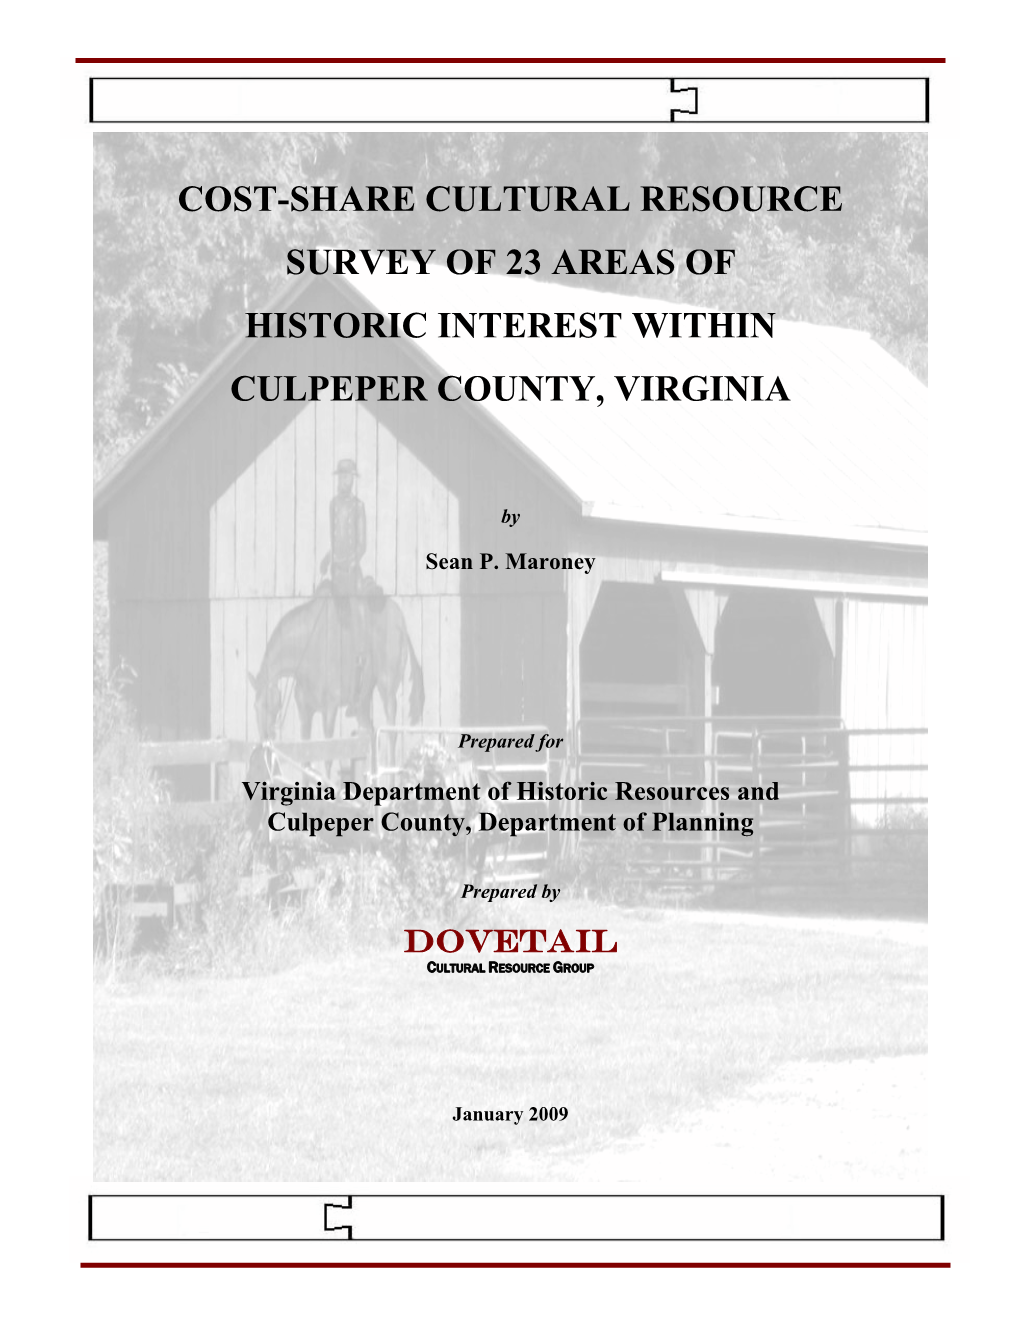 Cost-Share Cultural Resource Survey of 23 Areas of Historic Interest Within Culpeper County, Virginia